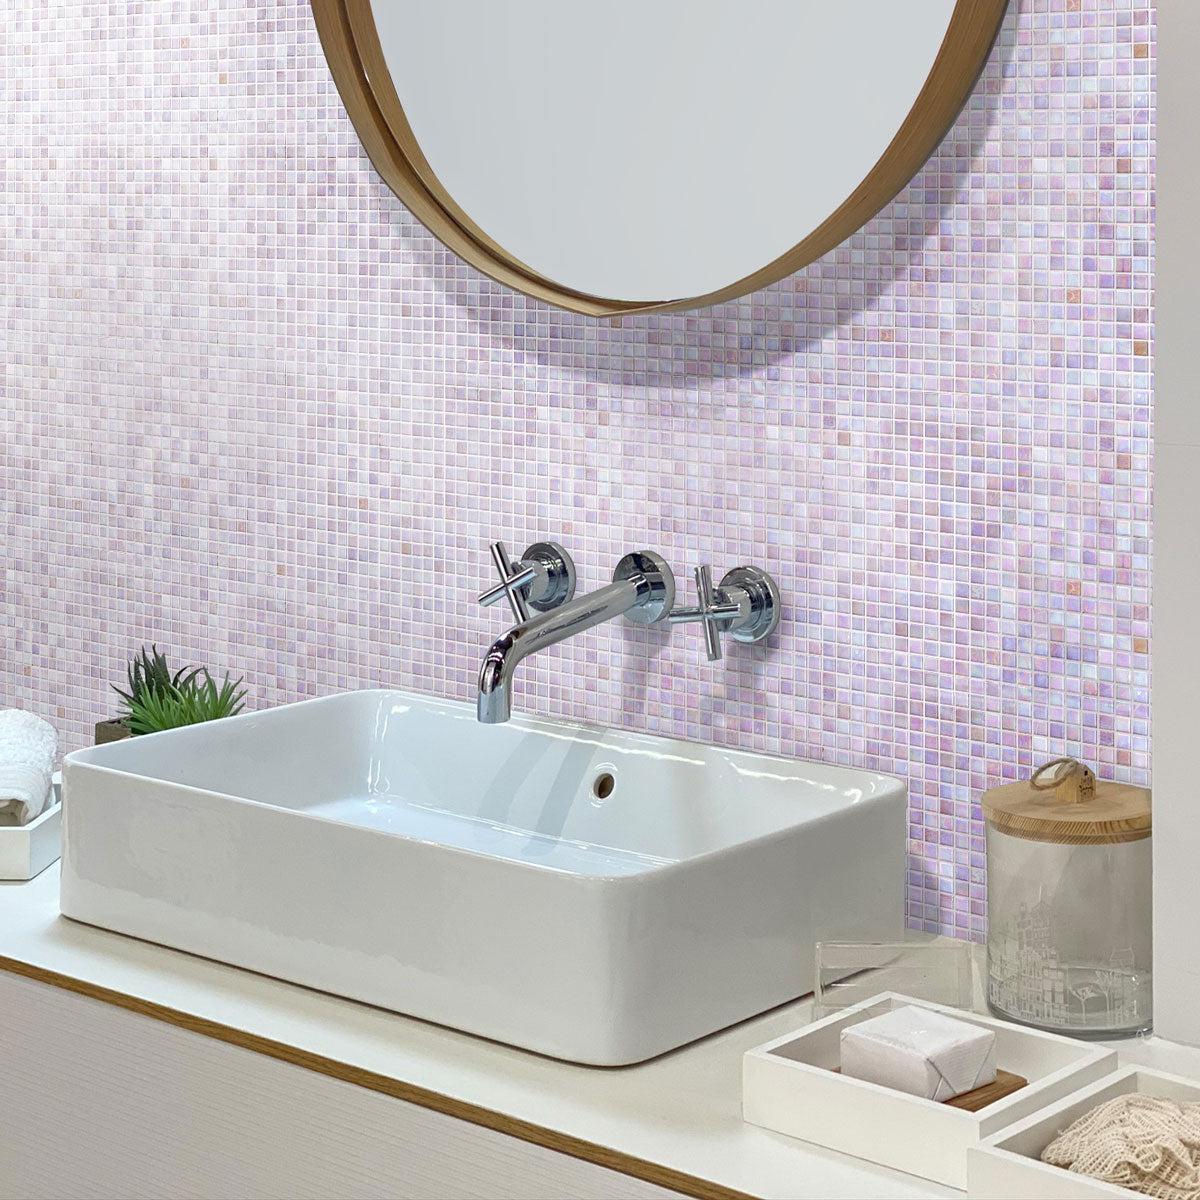 The bathroom is adorned with Pearlescent Sheer Pink and Purple Glass Pool Tile